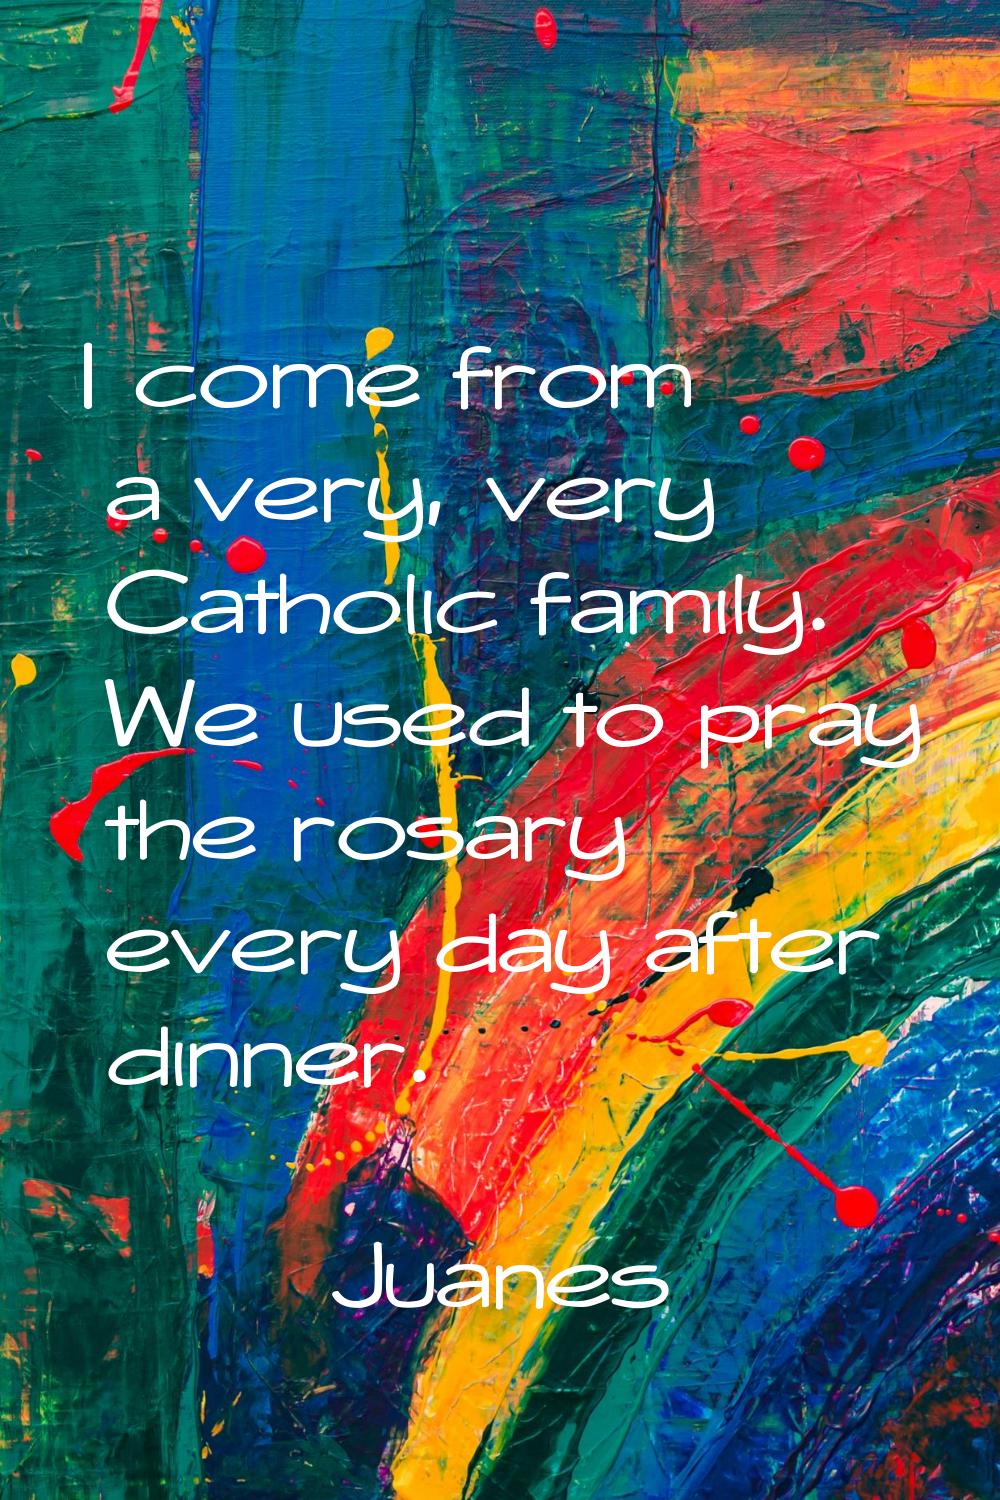 I come from a very, very Catholic family. We used to pray the rosary every day after dinner.